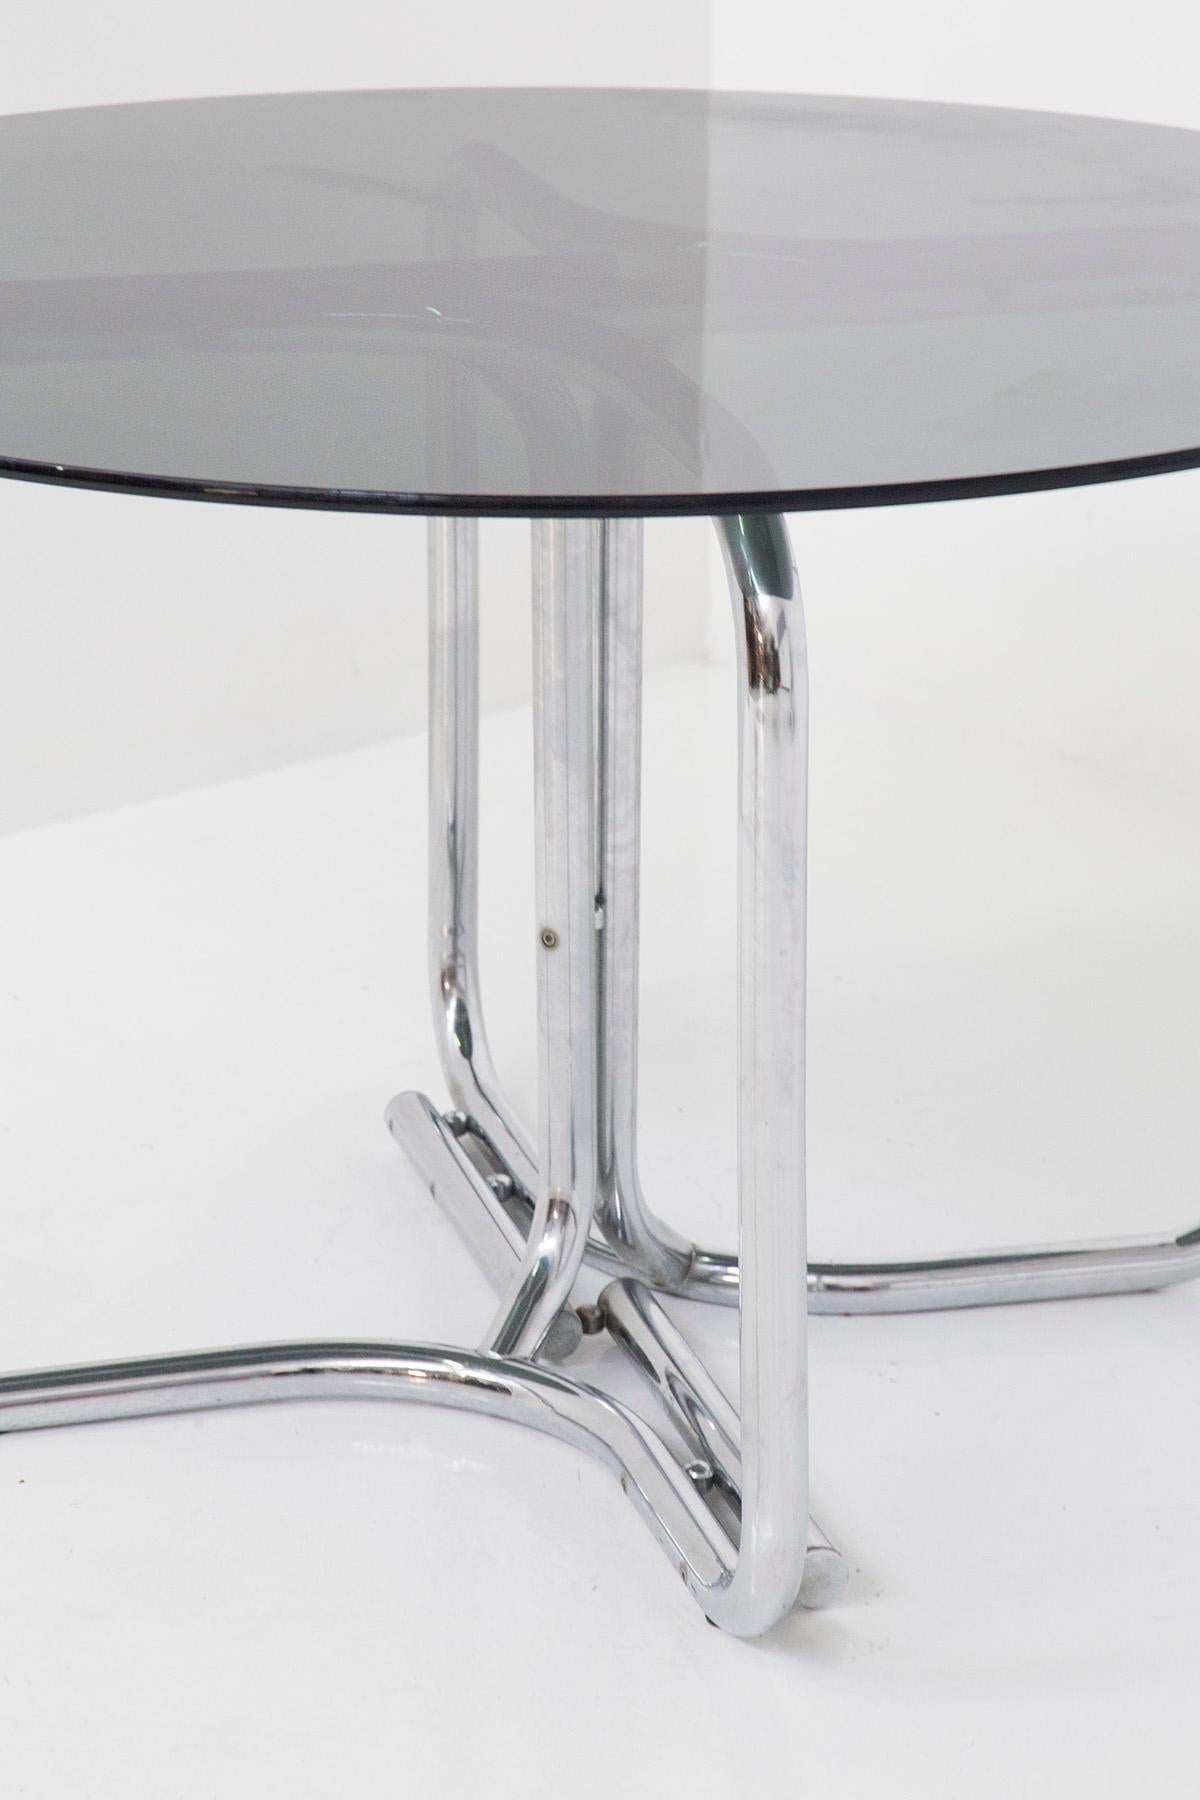 Space Age Italian Dining Table by Giotto Stoppino in Dark Glass